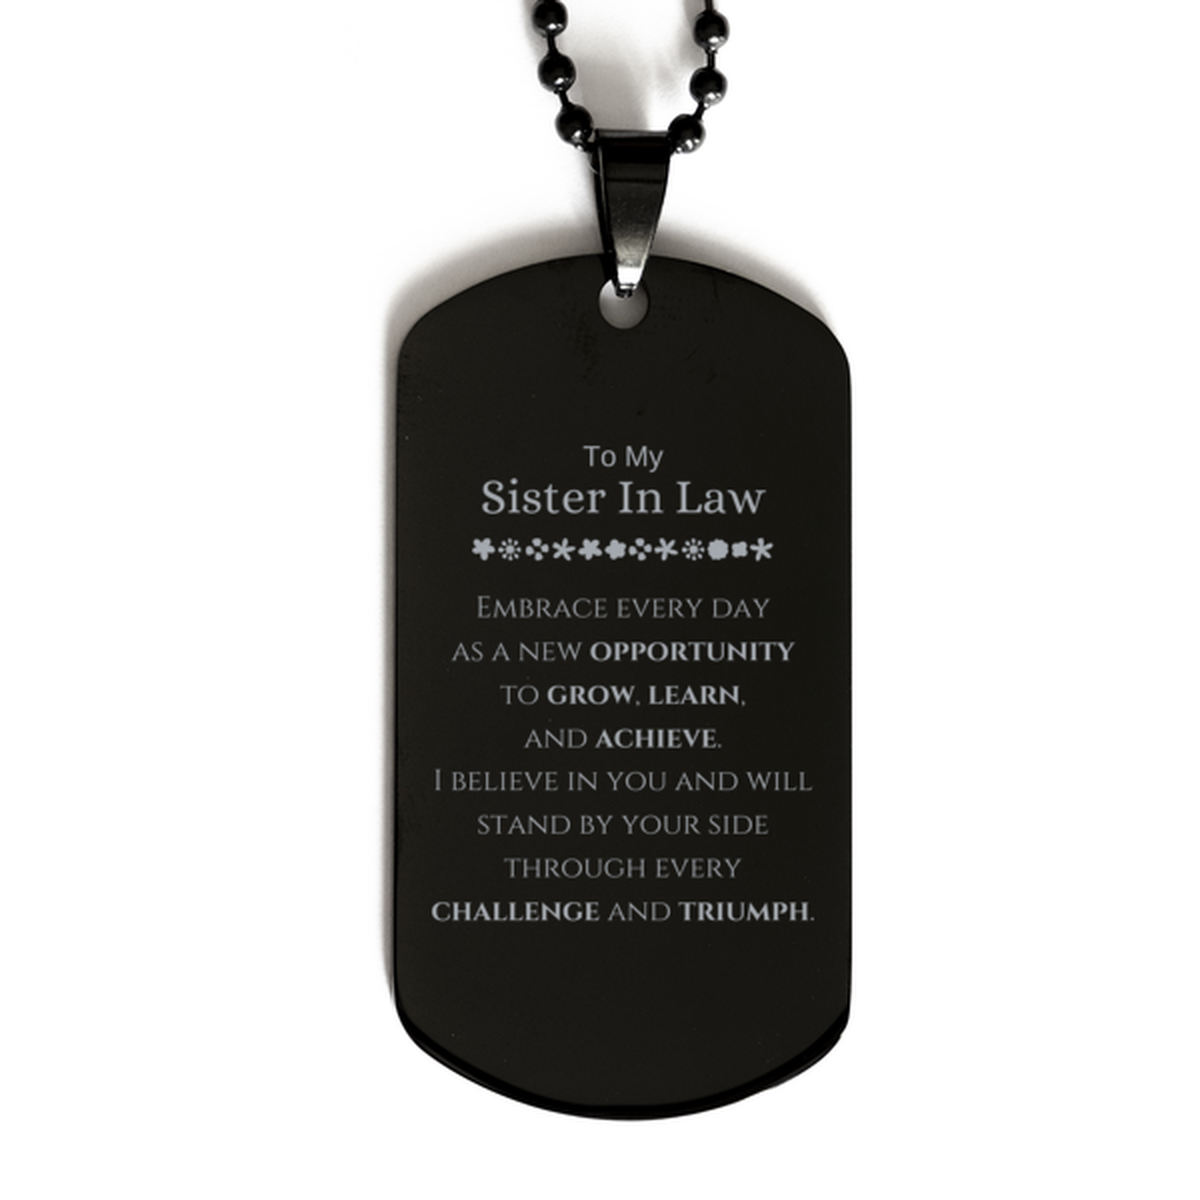 To My Sister In Law Gifts, I believe in you and will stand by your side, Inspirational Black Dog Tag For Sister In Law, Birthday Christmas Motivational Sister In Law Gifts